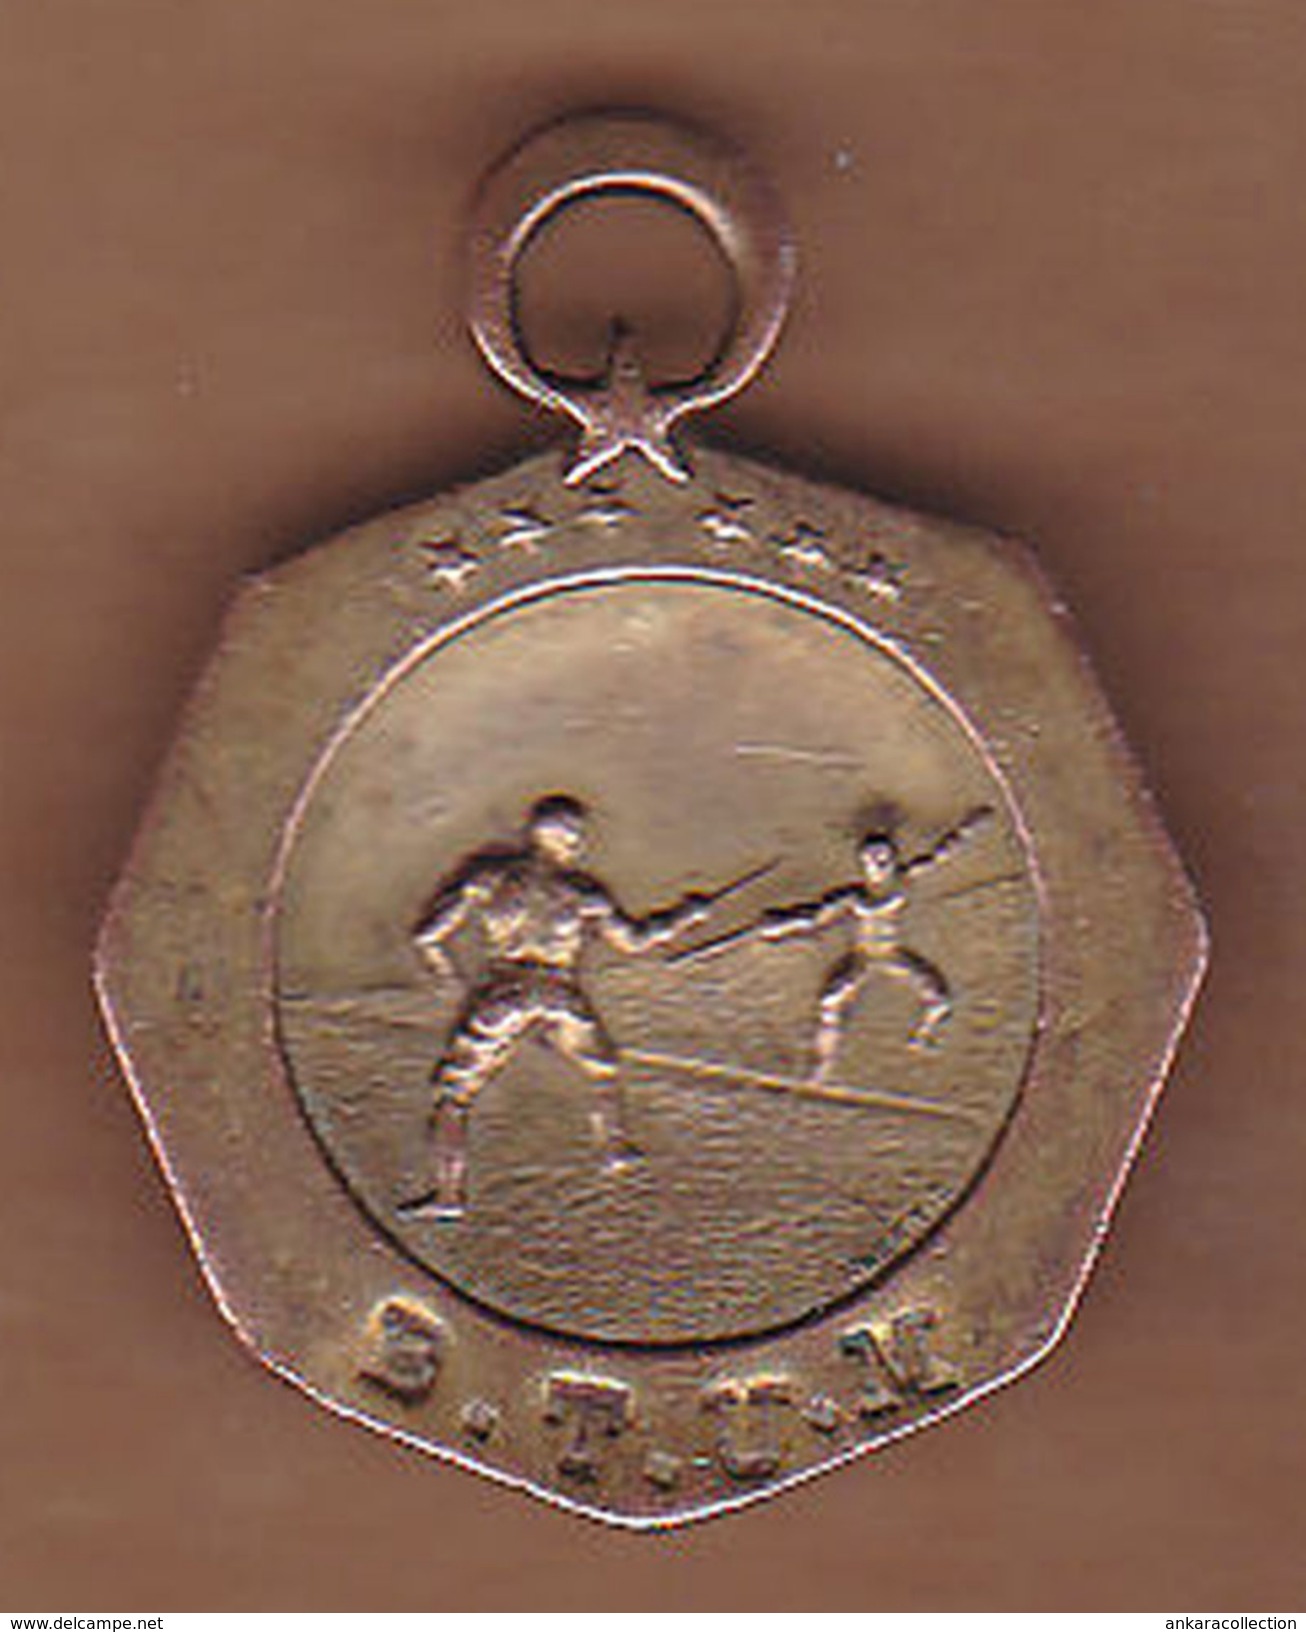 AC - FENCING MEDAL  1930s GENERAL DIRECTORATE OF YOUTH AND SPORTS TURKEY - Fechten